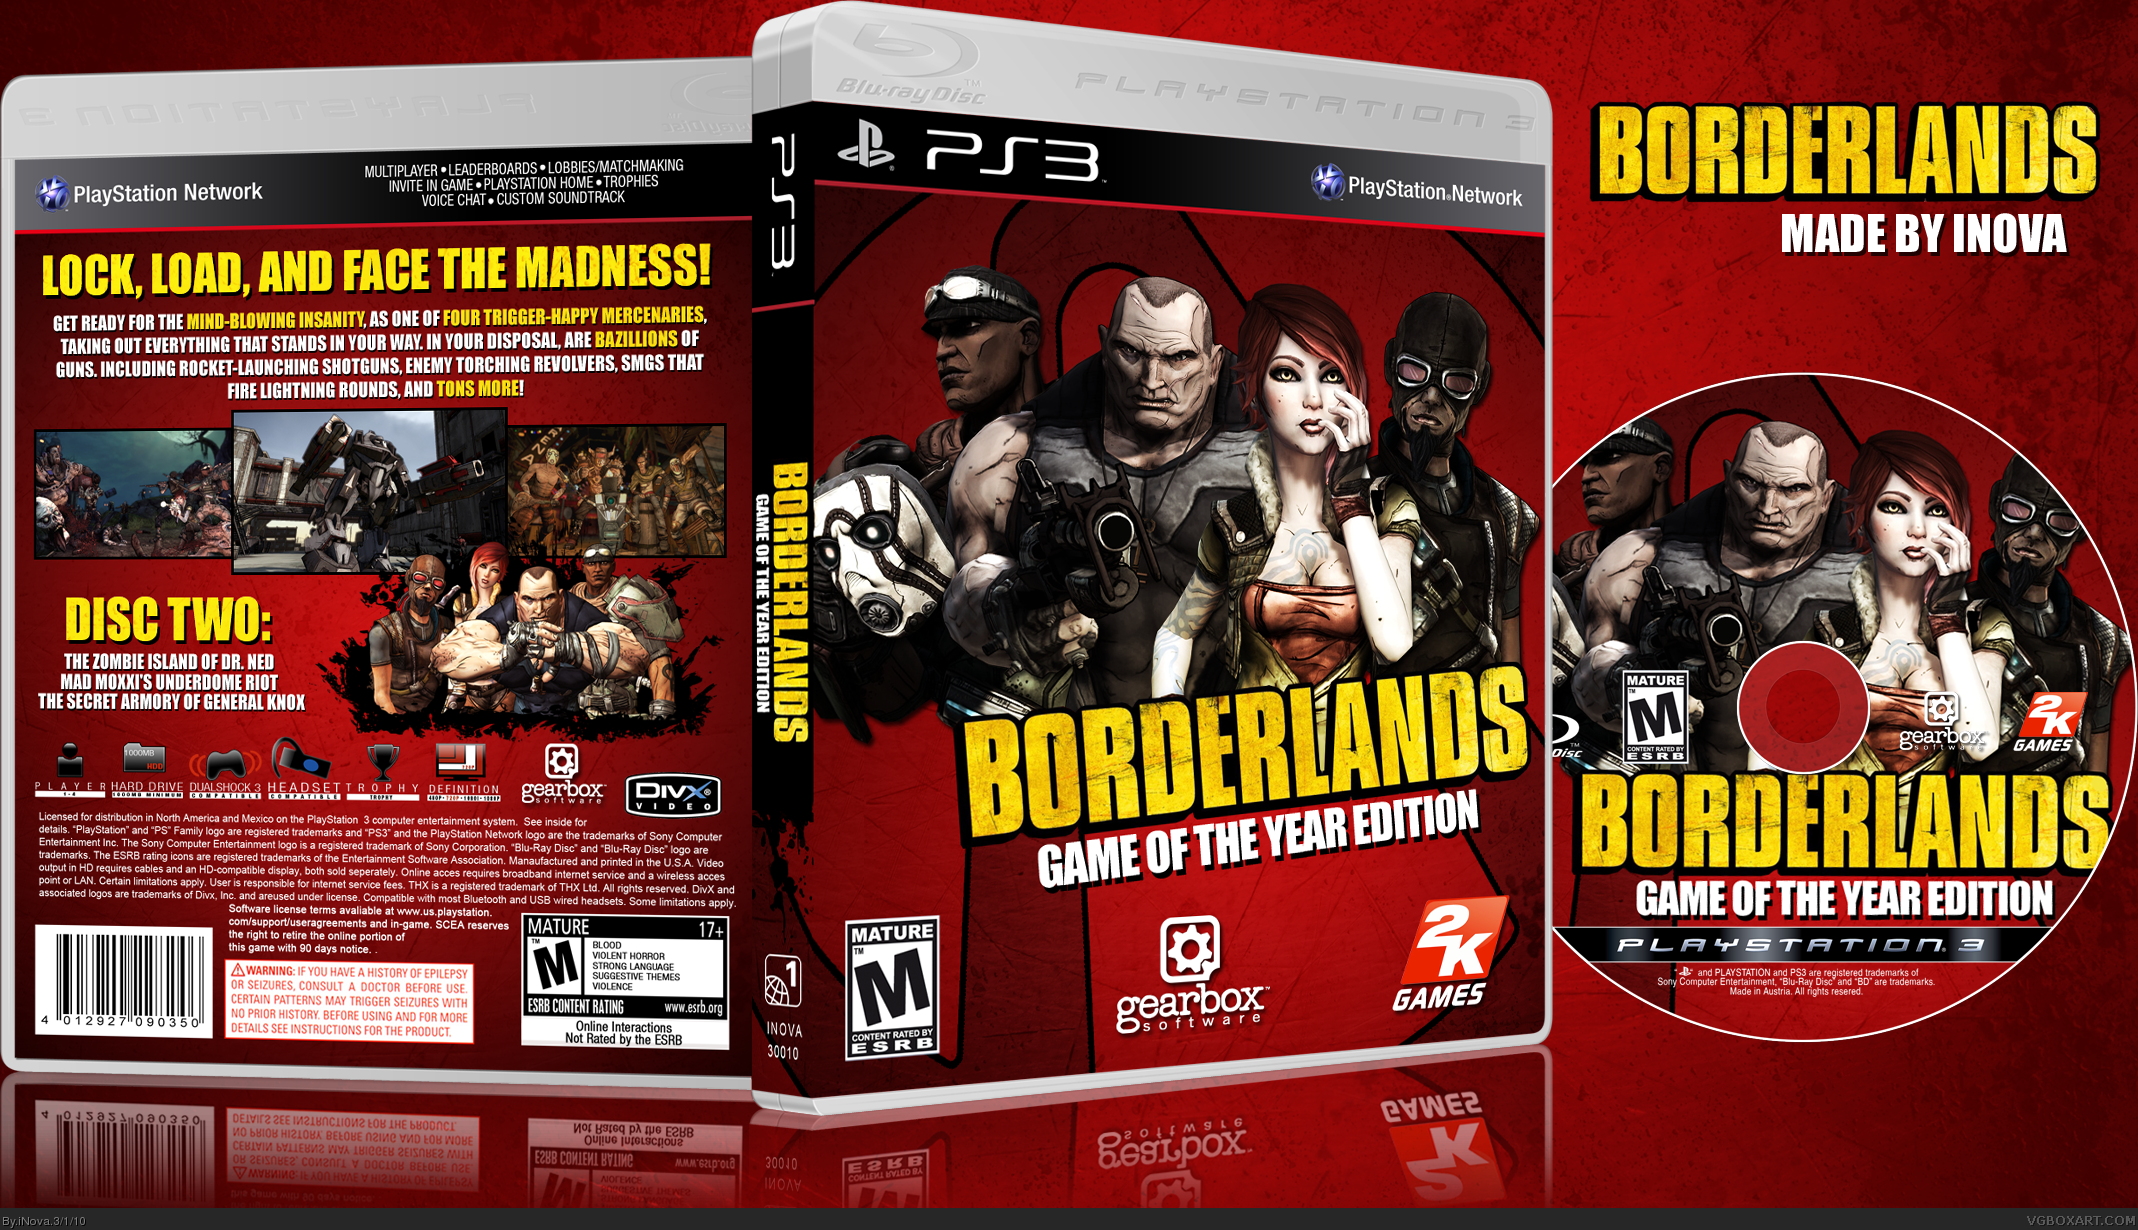 borderlands game of the year edition ps4 pre order